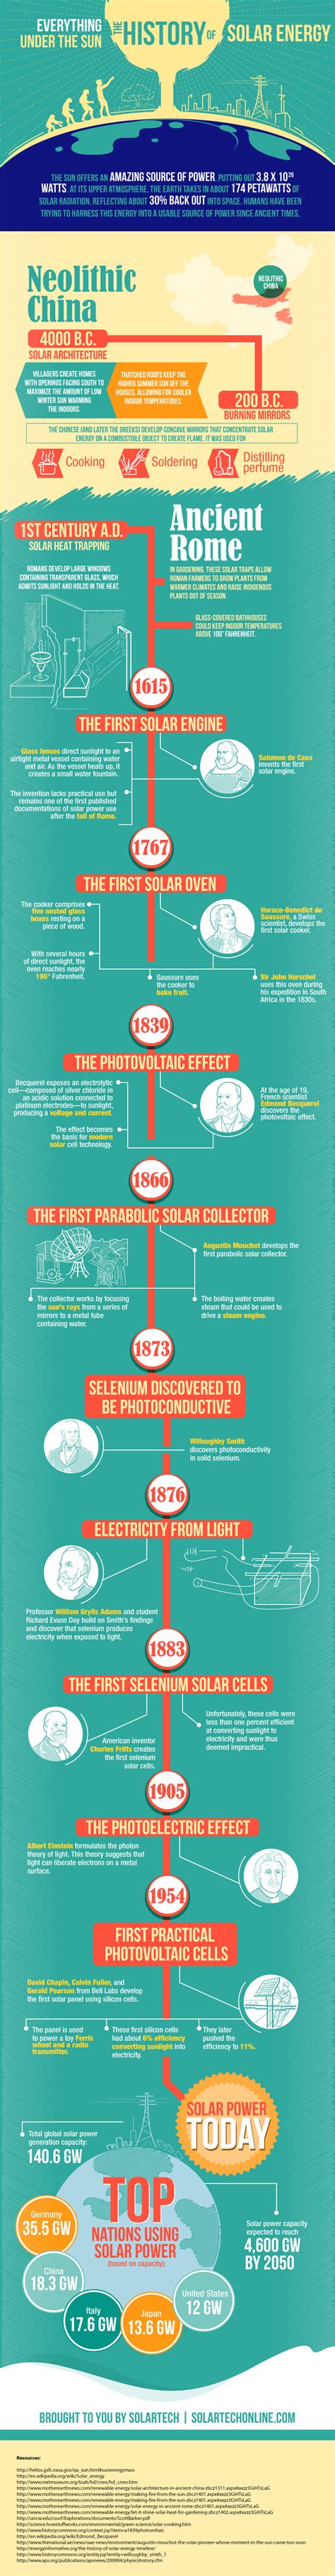 The History of Solar Energy [INFOGRAPHIC]